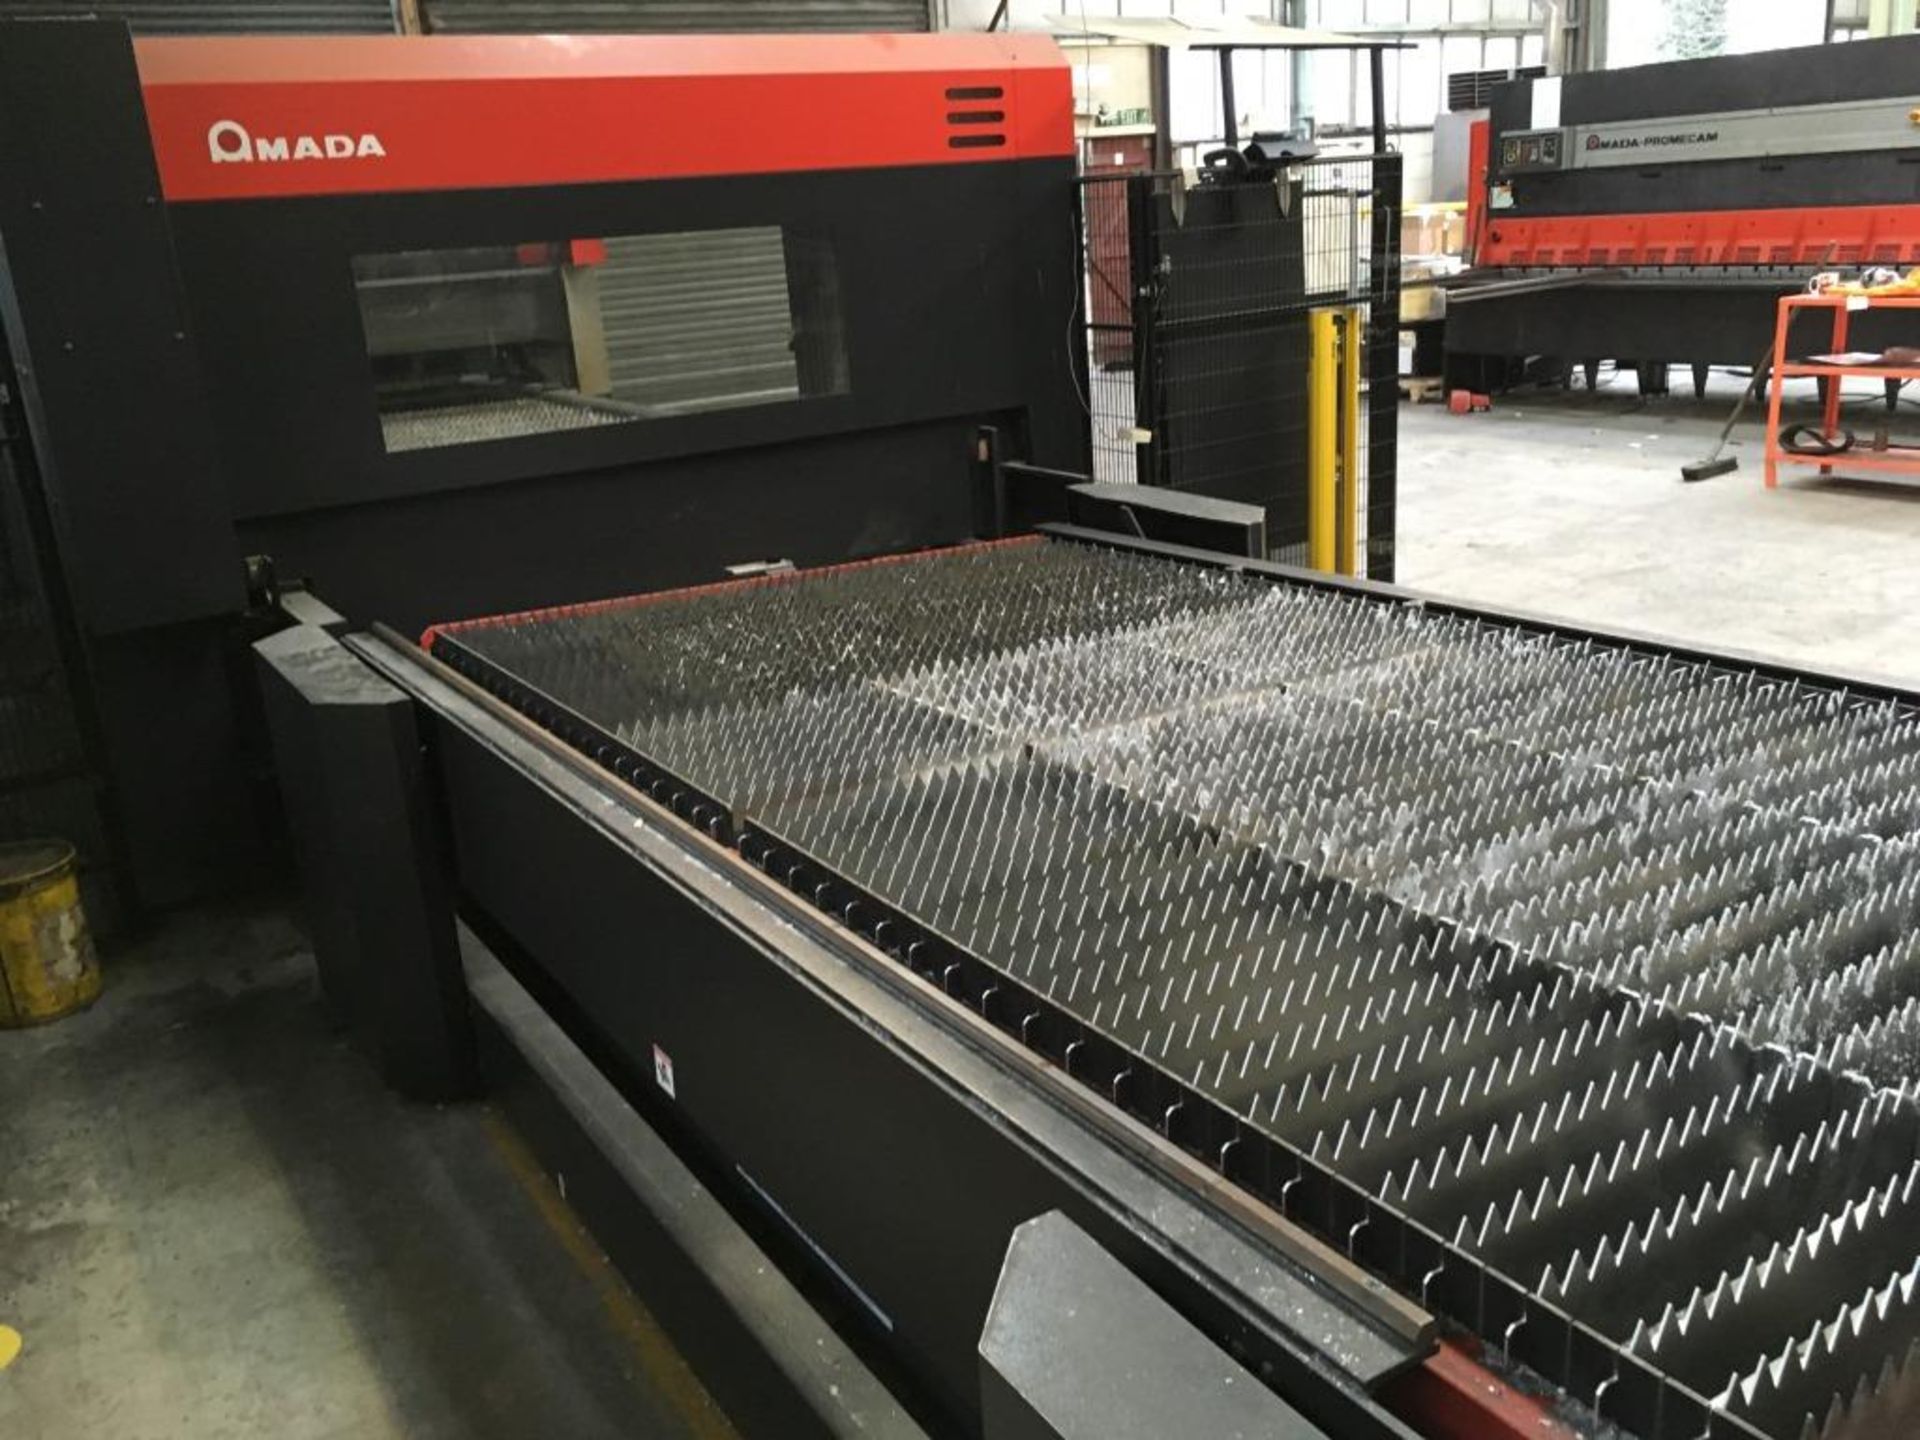 Amada FO MII 3015 NT 4 kw laser cutter, Year of manufacture: 2011, Serial No. 033, approx. 15,000 - Image 13 of 22